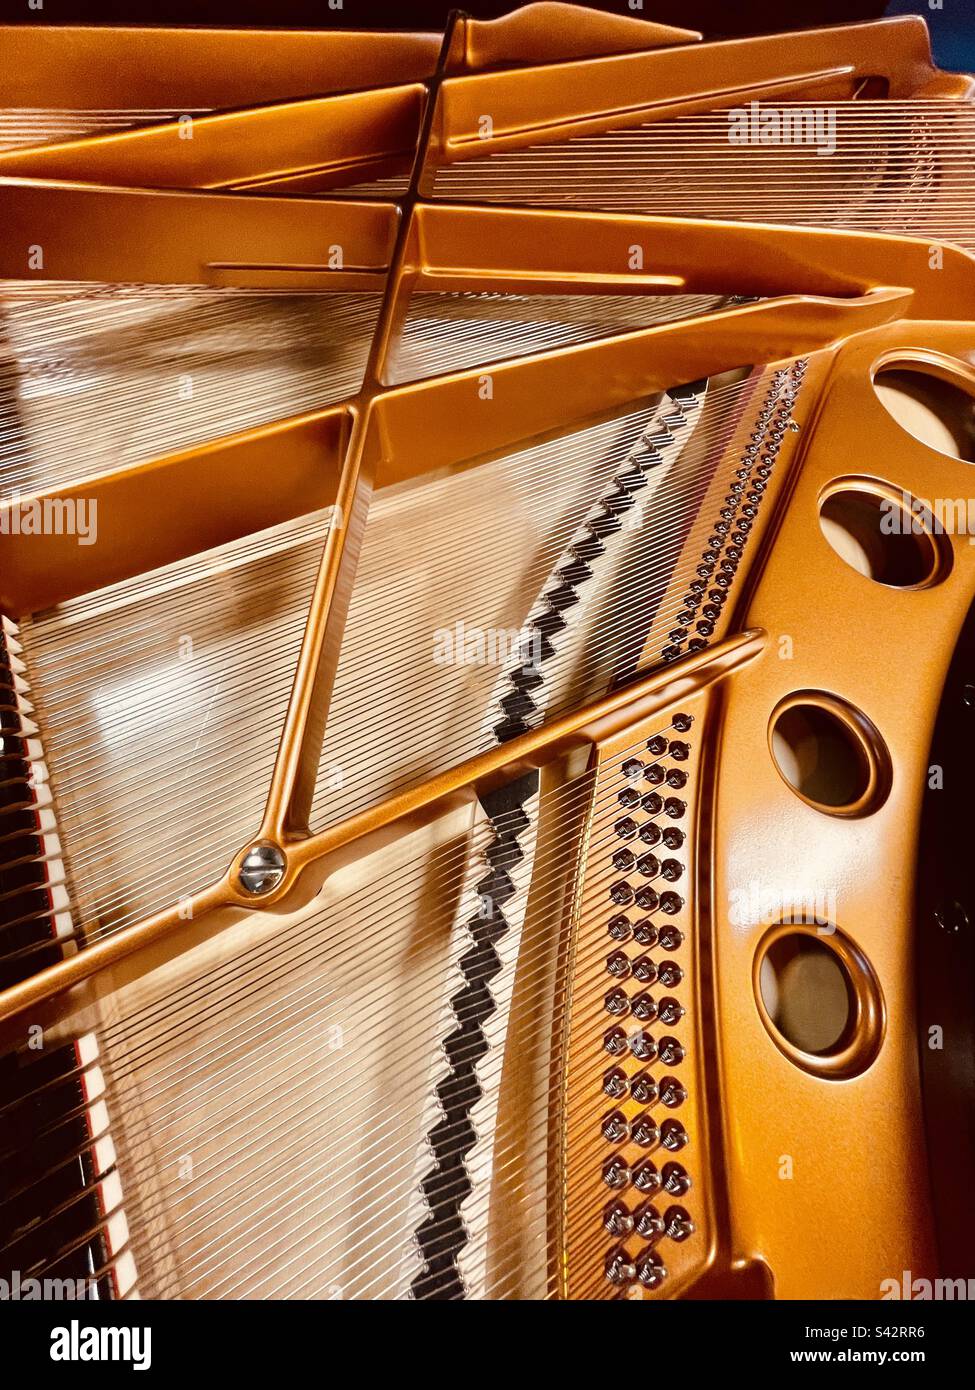 Grand piano frame and strings design Stock Photo